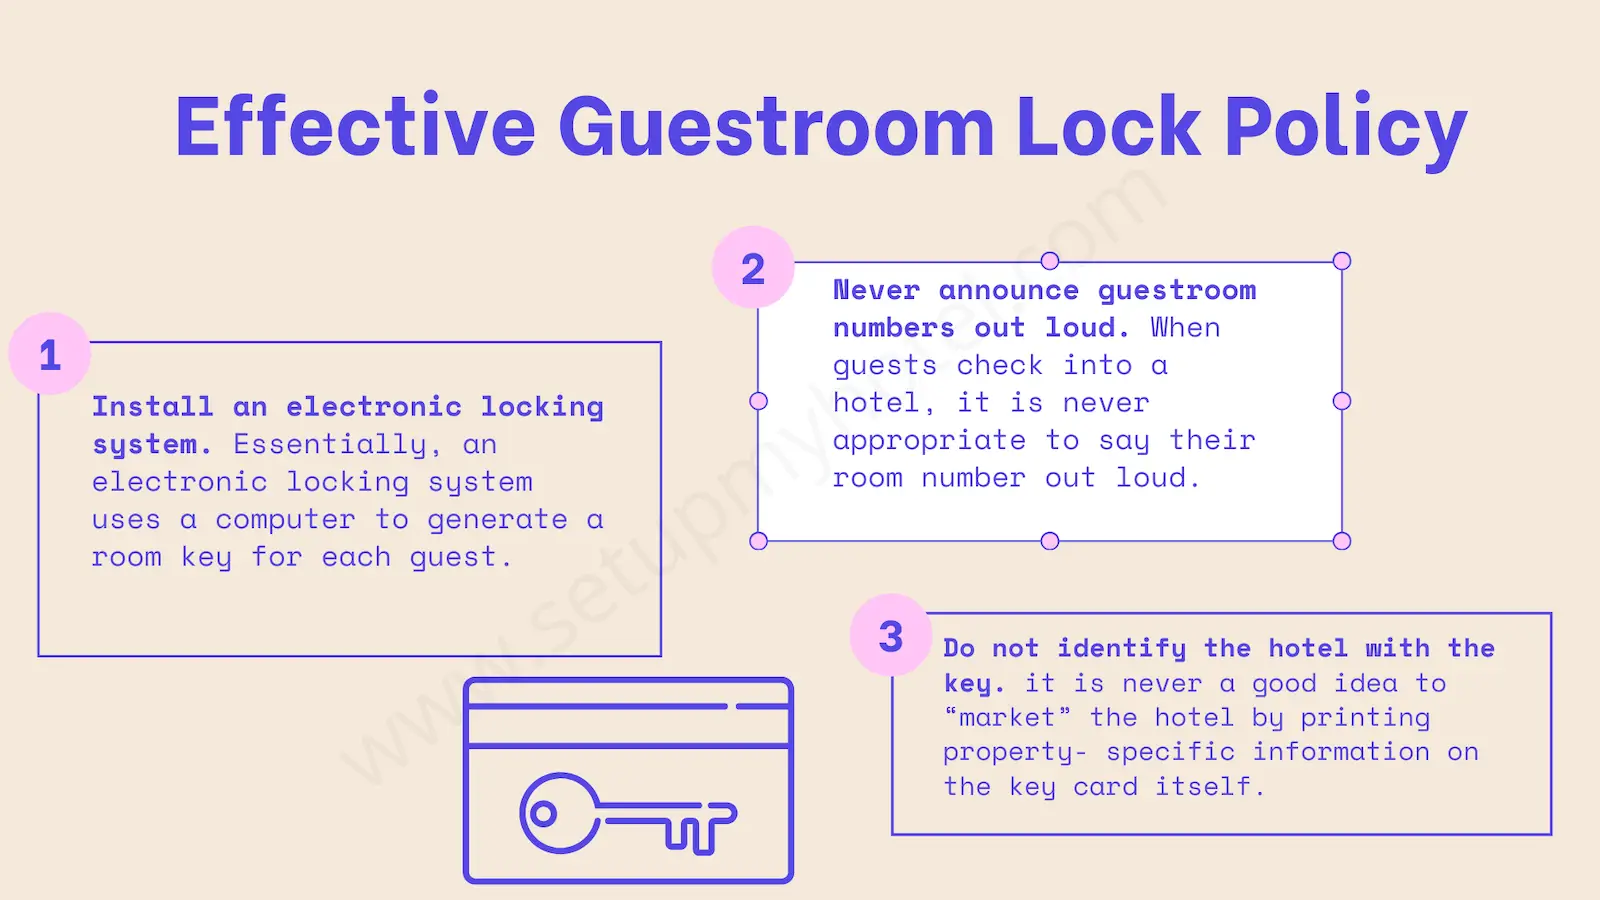 Establishing an Effective Guestroom Lock Policy The following steps outline an effective policy to protect the security of hotel guests by controlling the distribution of room keys and ensuring the effectiveness of guestroom locks. It also serves as a good example of how a safety program should be implemented. Notice the number of different components of a hotel’s operation that contribute to the effectiveness of this policy, from the use of technology (by installing electronic locking systems) to staff training (following procedures such as never announcing room numbers out loud) to management functions (performing a lock audit).